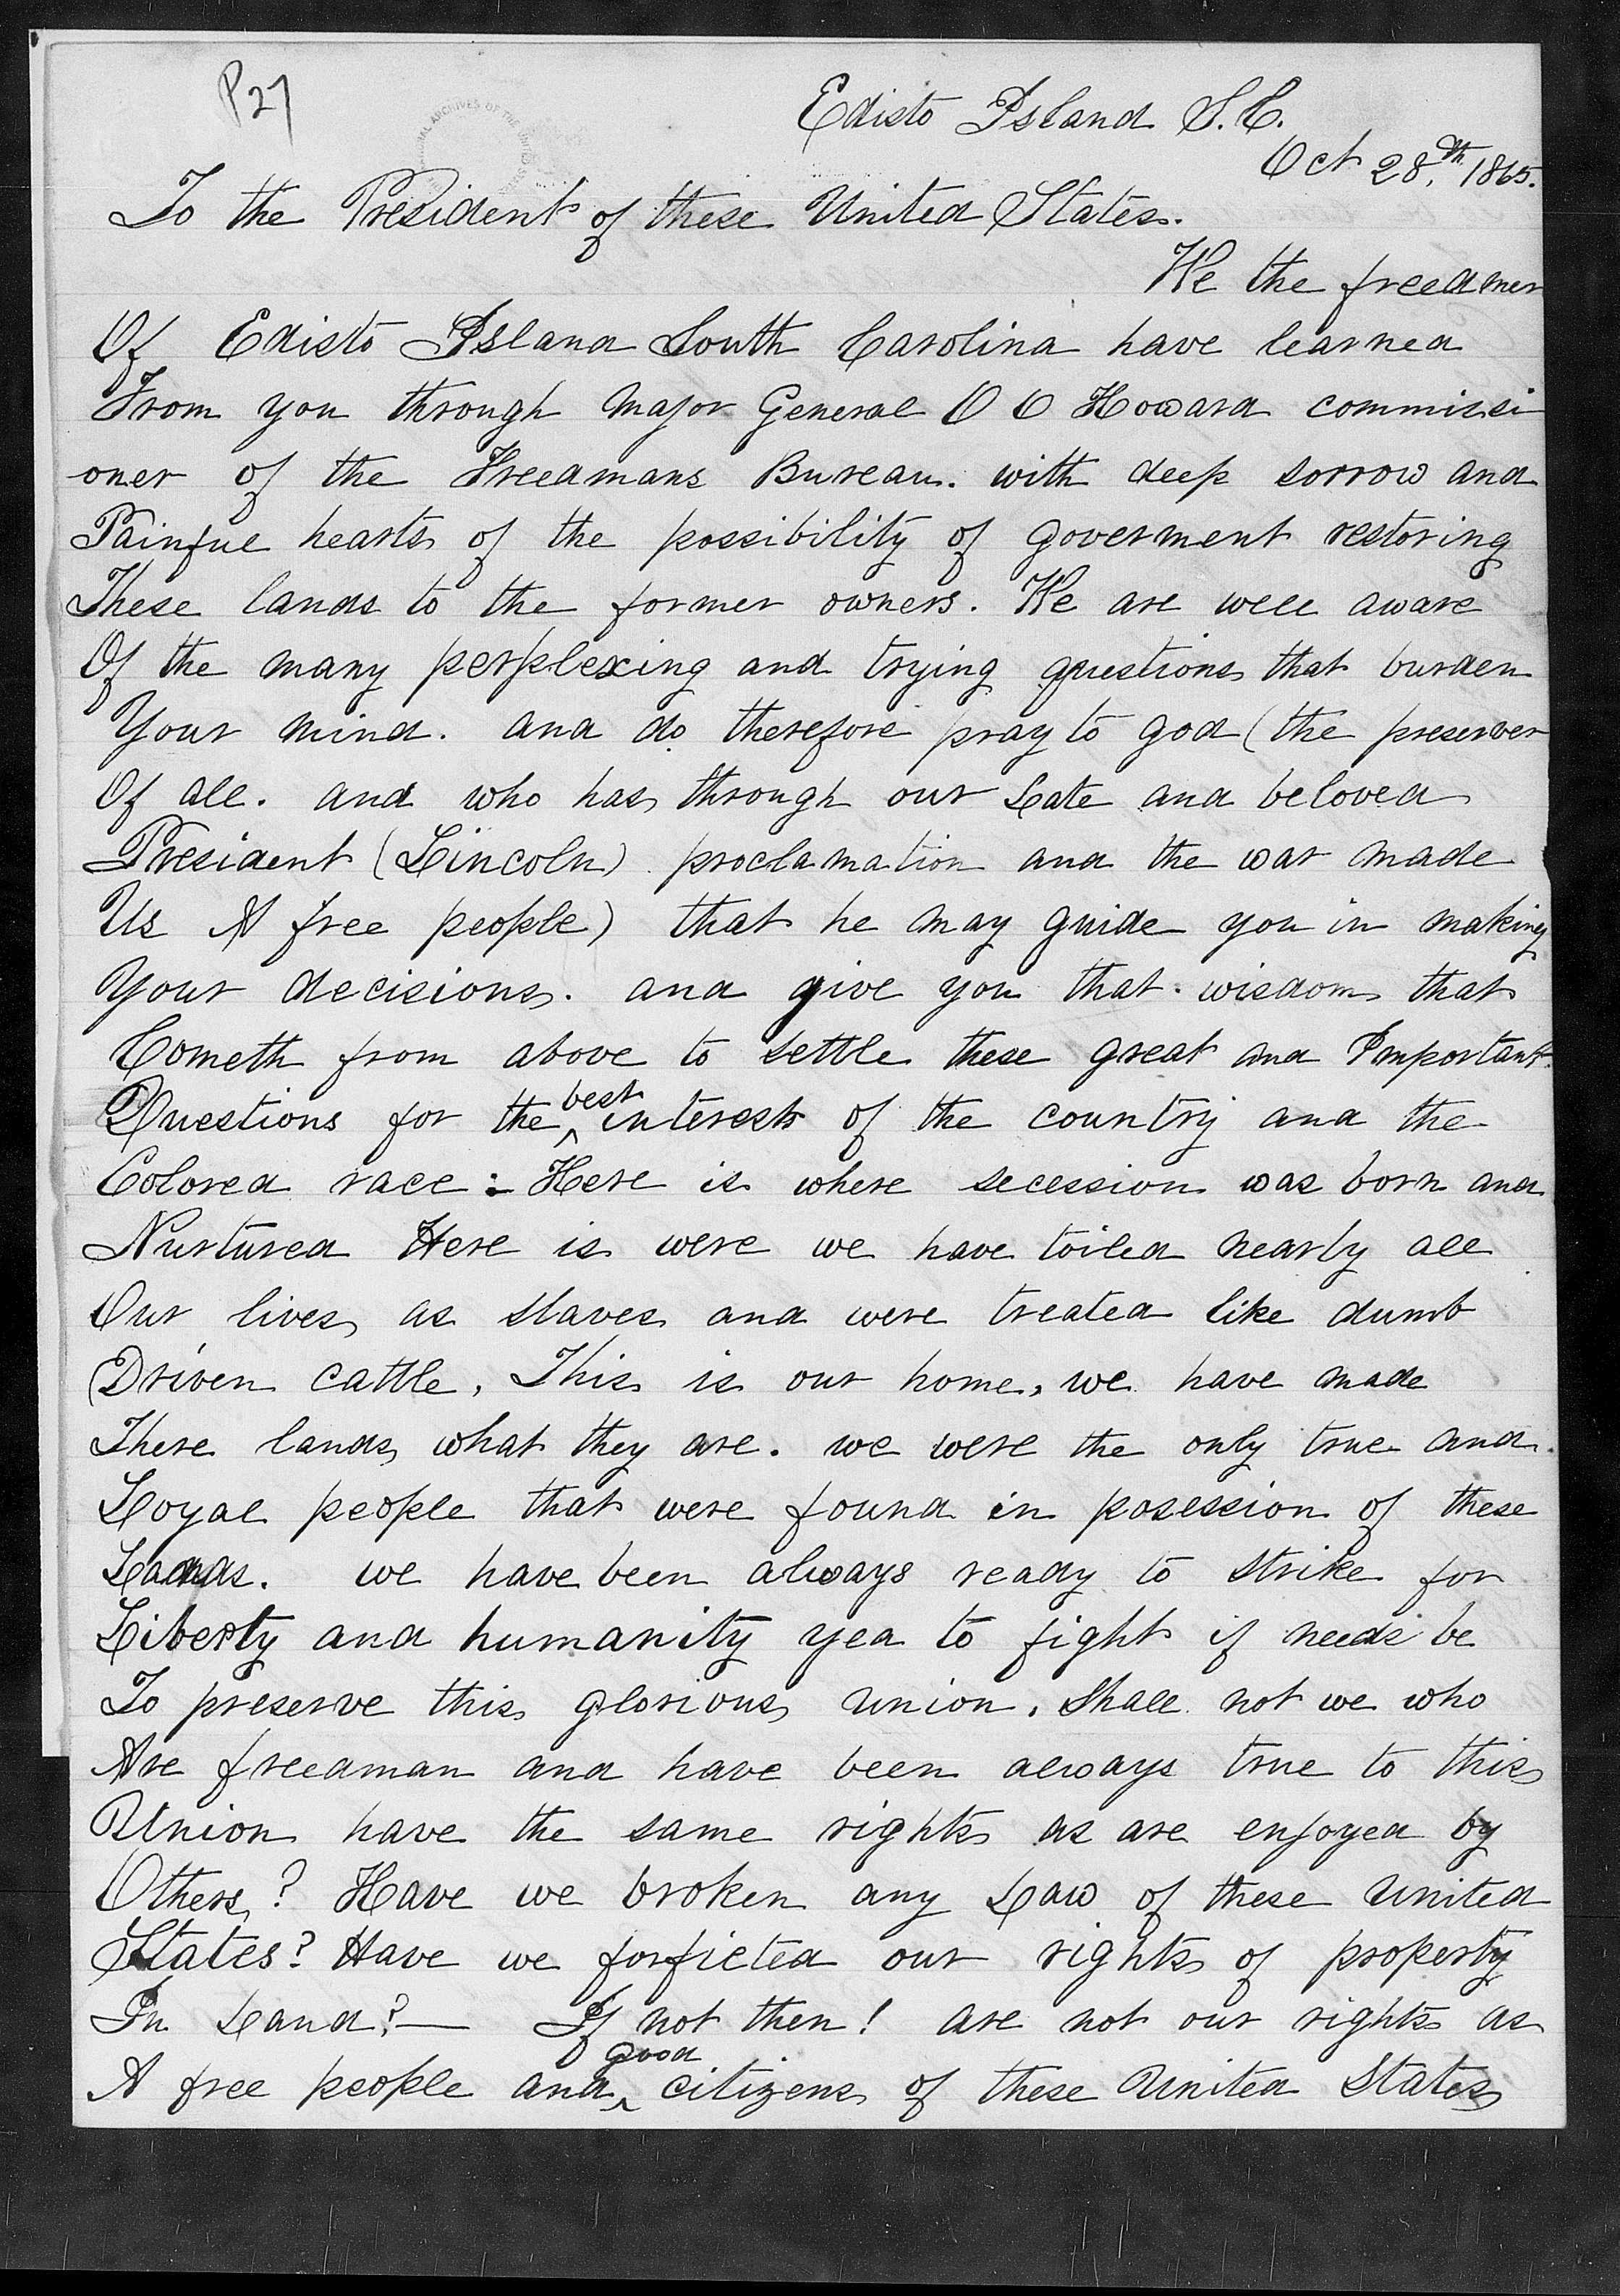 Hand written document on paper reading "P27 Edisto Island. J. M., To the President of these United States. Oct 28th 1860. He the be freedmer Of Cristo Island South Carolina have learned. From oner you through major General 0 0 Howard commissi of the Grecamans Bureau.. with deep sorrow and of Painful hearts. of fesssibility of goverment restoring the These lands to the former owners. We are well aware Of the many perplexing. trying questions that burken. and. Your mind. and do therefore pray to god (the percesser Of all. And who has through our late and beloven. Precident (Lincoln proclamation and the was made Us & free people) that he may guide you Your decisions. and in making give you that wisdom that Cometh from above to settle these great and Pomportant Questions for the bed interest. of country the and the Colored race: Here is where secession was born and Nurturea Here is were we have toiled nearly ale Our lives, as slaves and. were treated like dumb. Driven cattle. This. is our home, we have made There lands, what they are. we were the only tone and. Goyal people that were found in posession. of we have been always ready to strike these for Liberty and humanity yea to fight if nude be To preserve this glorious, union, shall not we who Nee frecaman and have been always time to this. Inion have the same rights we are enjoyed by Other? Have we broken any saw of these united_ Plates? Have we forfictea rights of property out. In Land? – If not then! are not our rights us A free people ander oiligene, of these united states..."